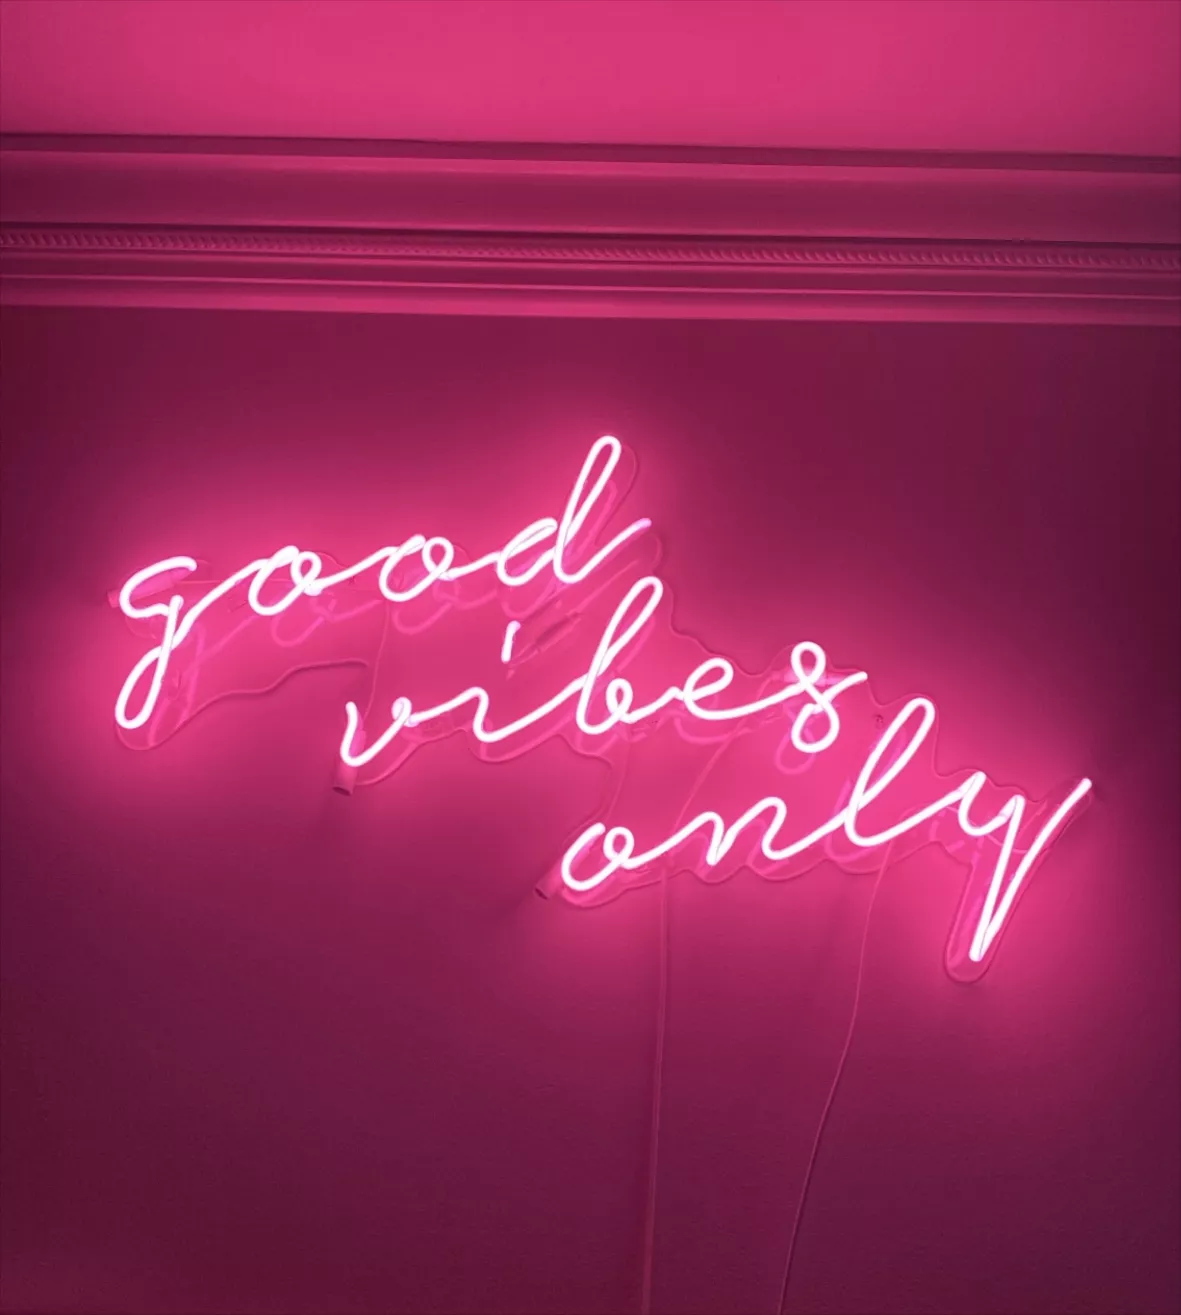 good vibes only background